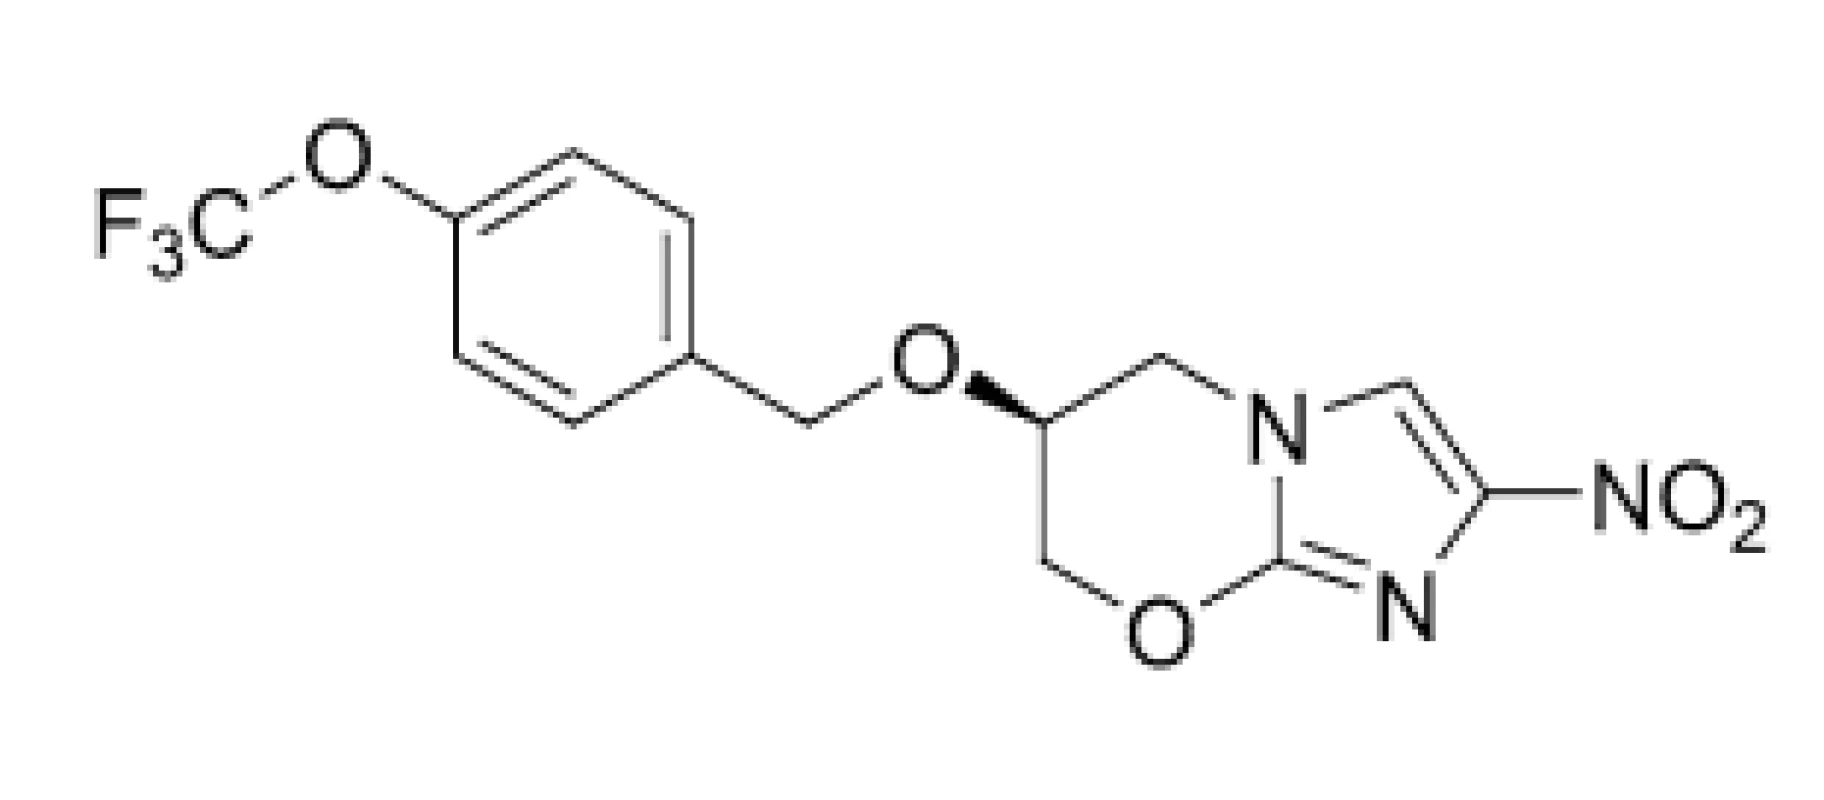 Chemical structure of pretomanid (PTM; 3)